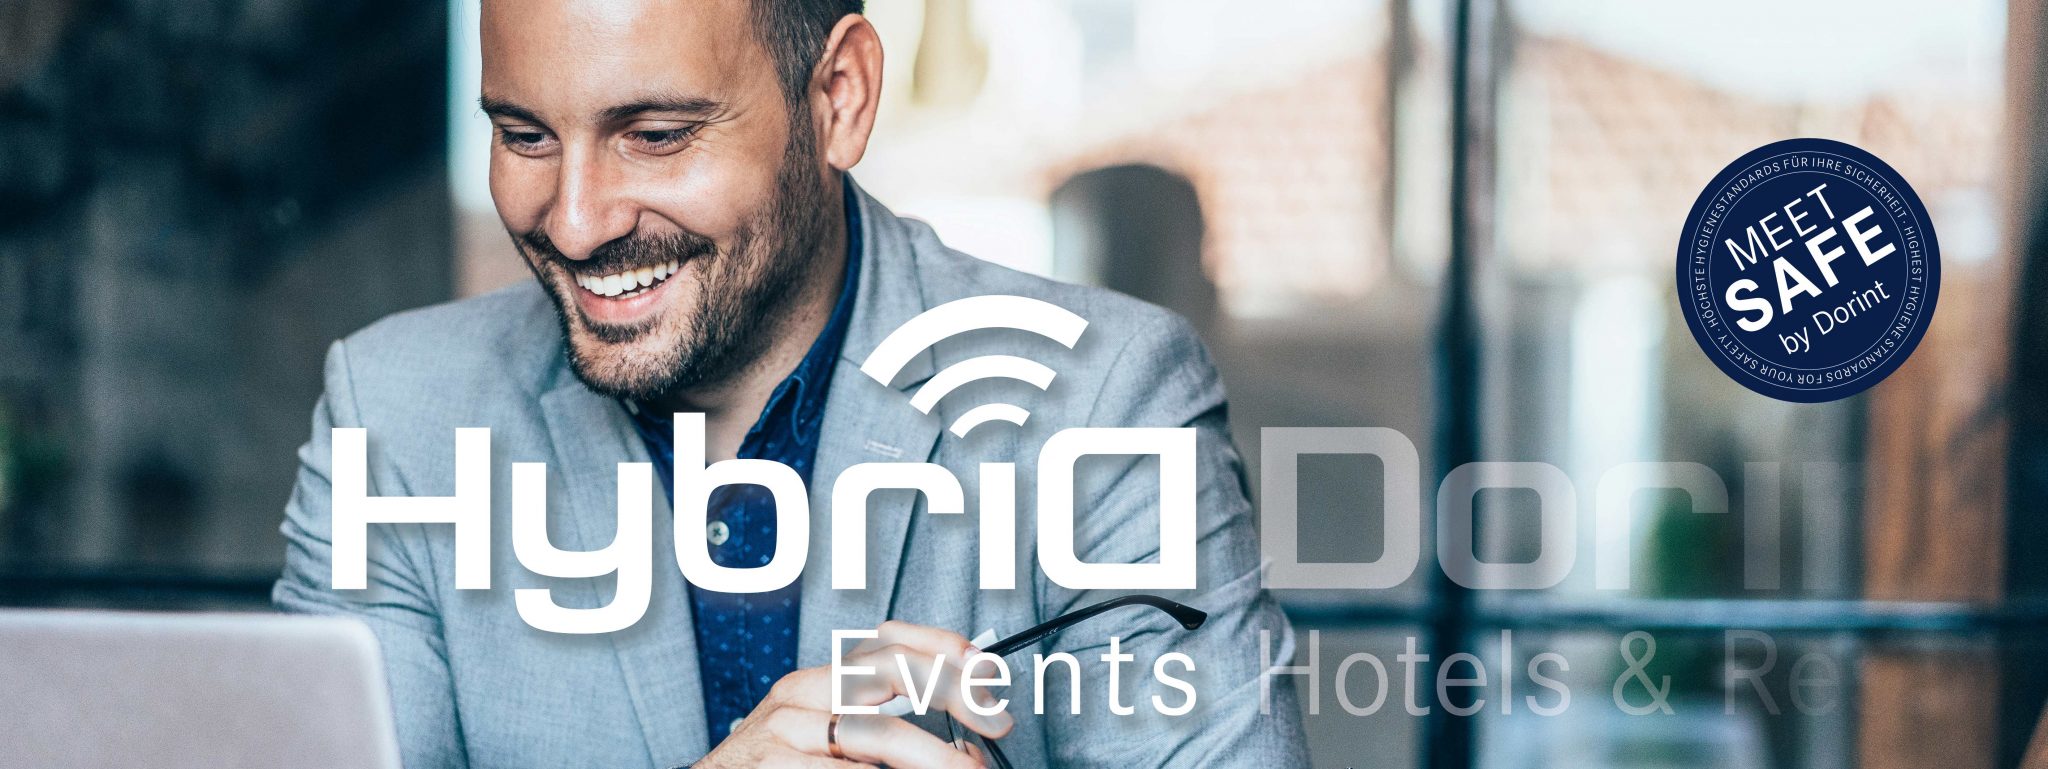 Hybrid Events by Dorint Hotels